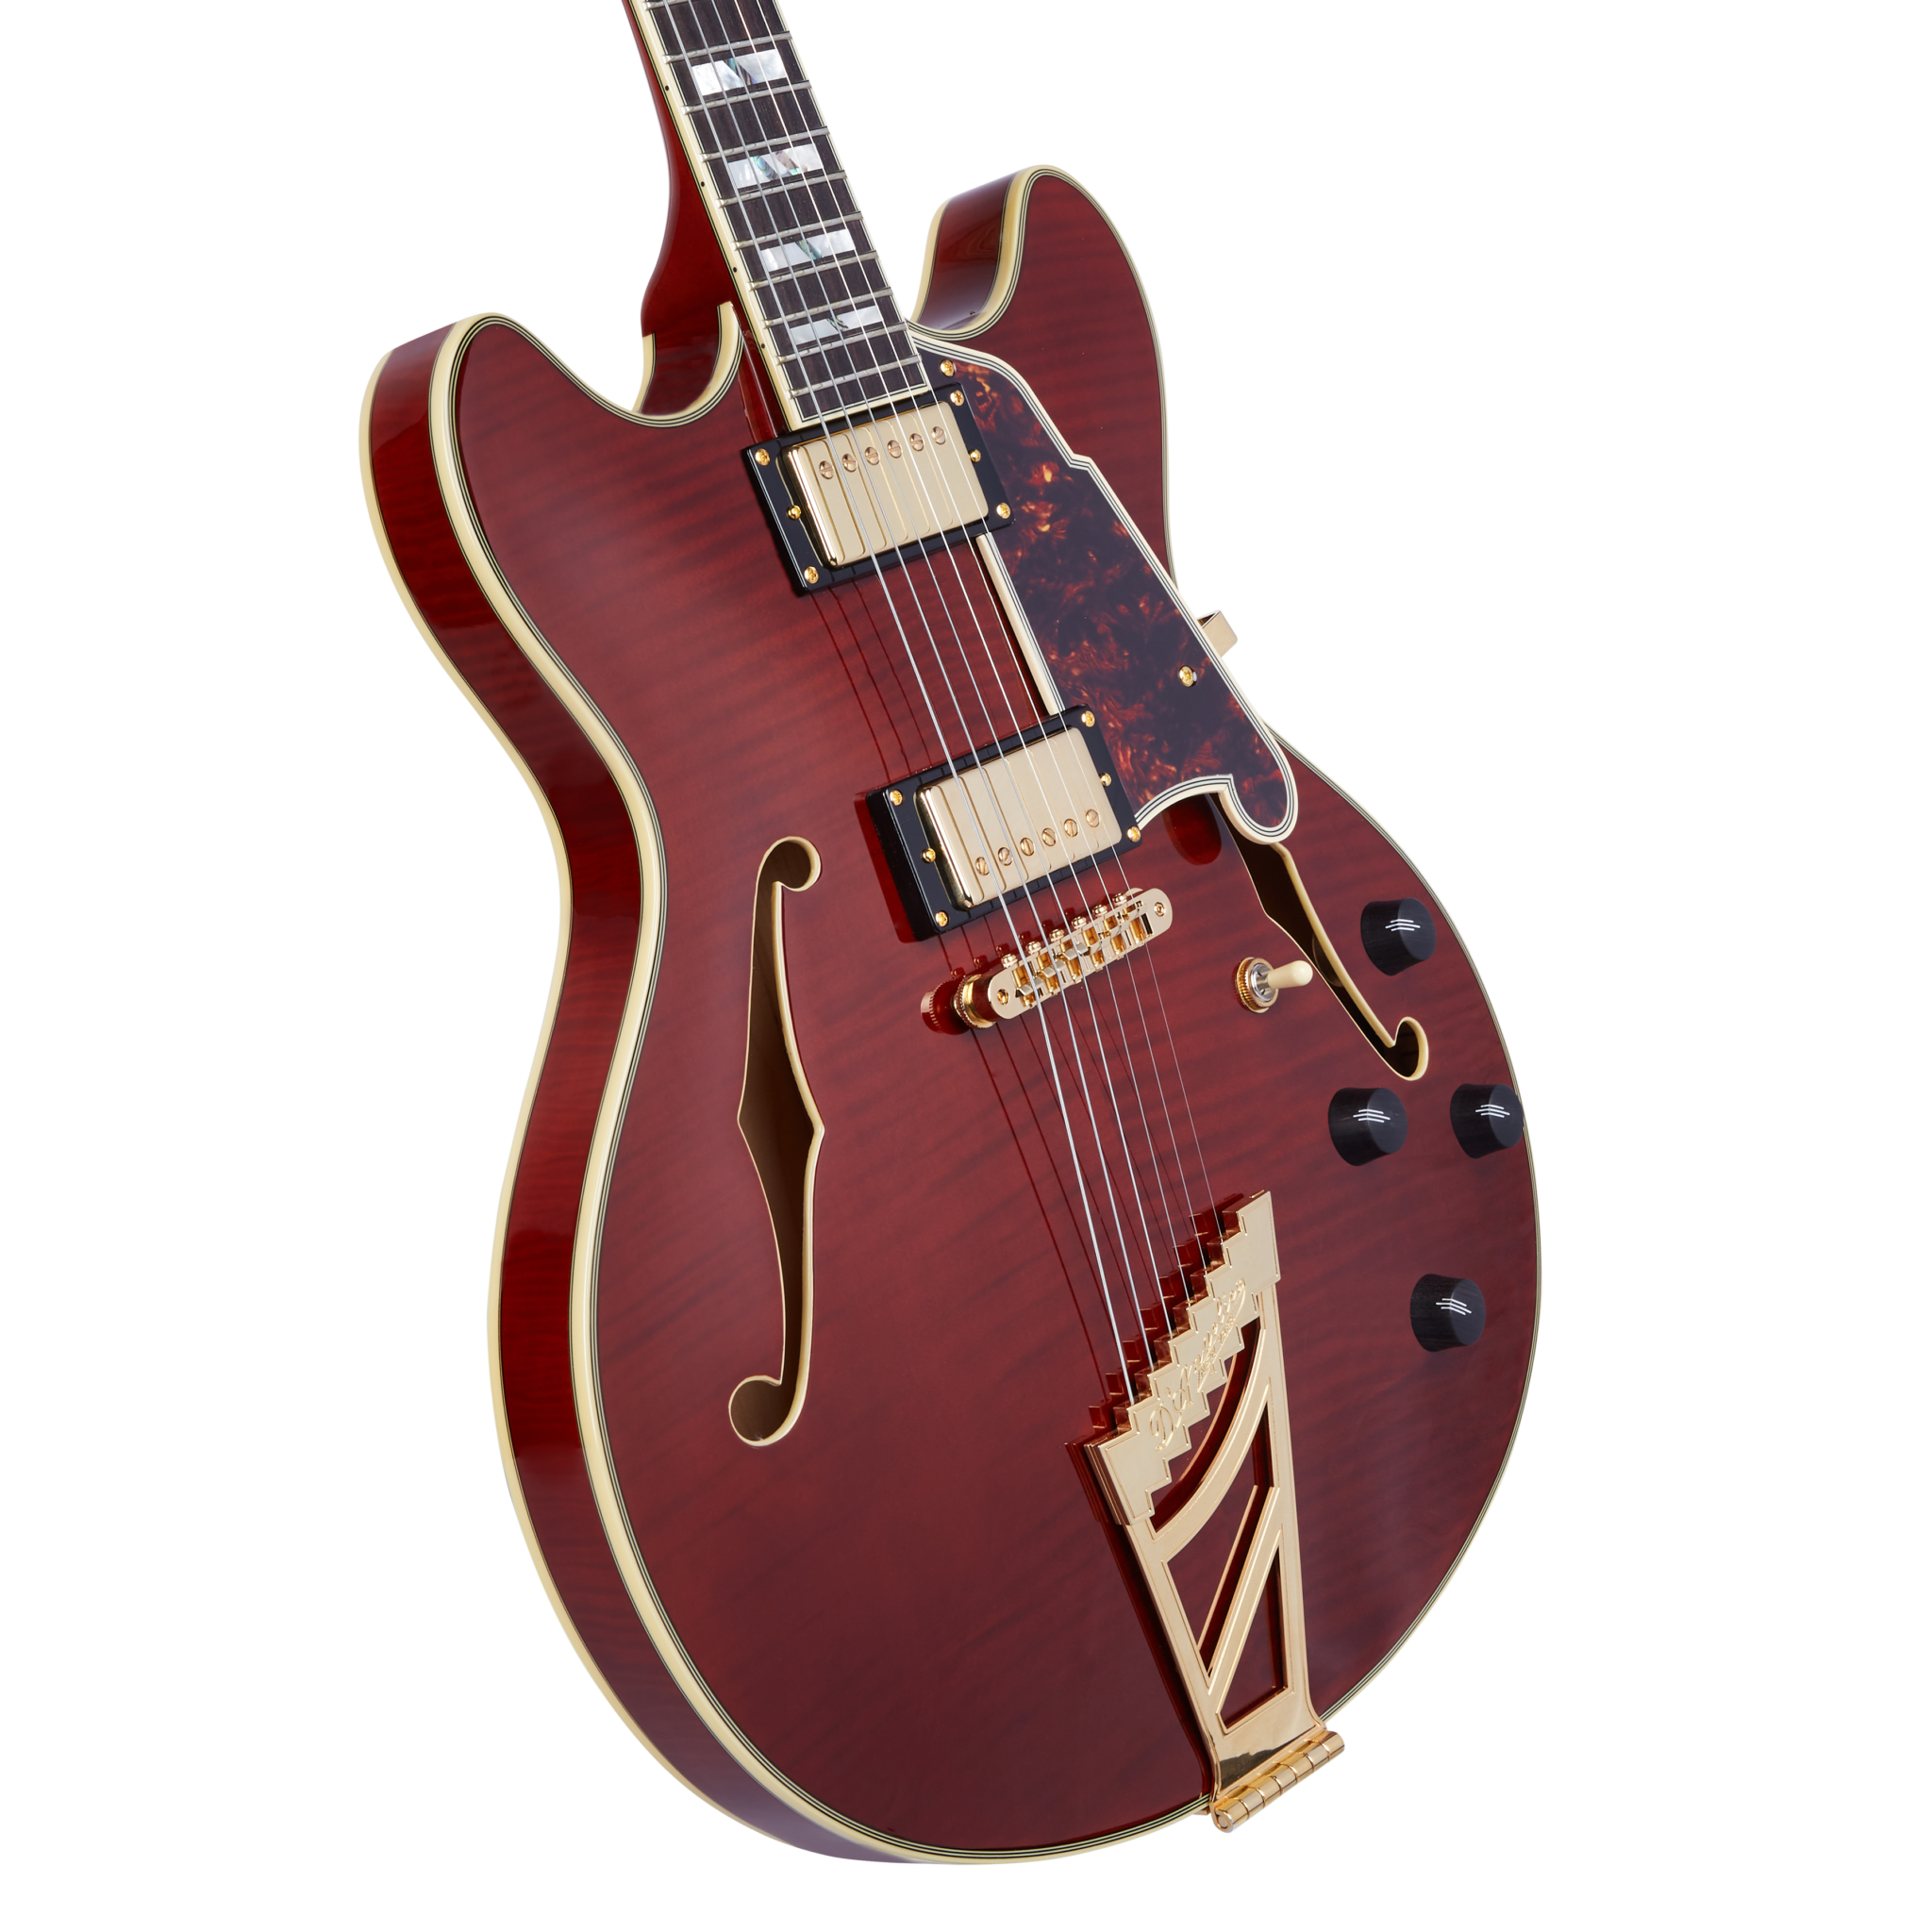 D'Angelico Excel DC Semi-hollowbody Electric Guitar With Stopbar Tailpiece, Viola DAEDCVIOGS